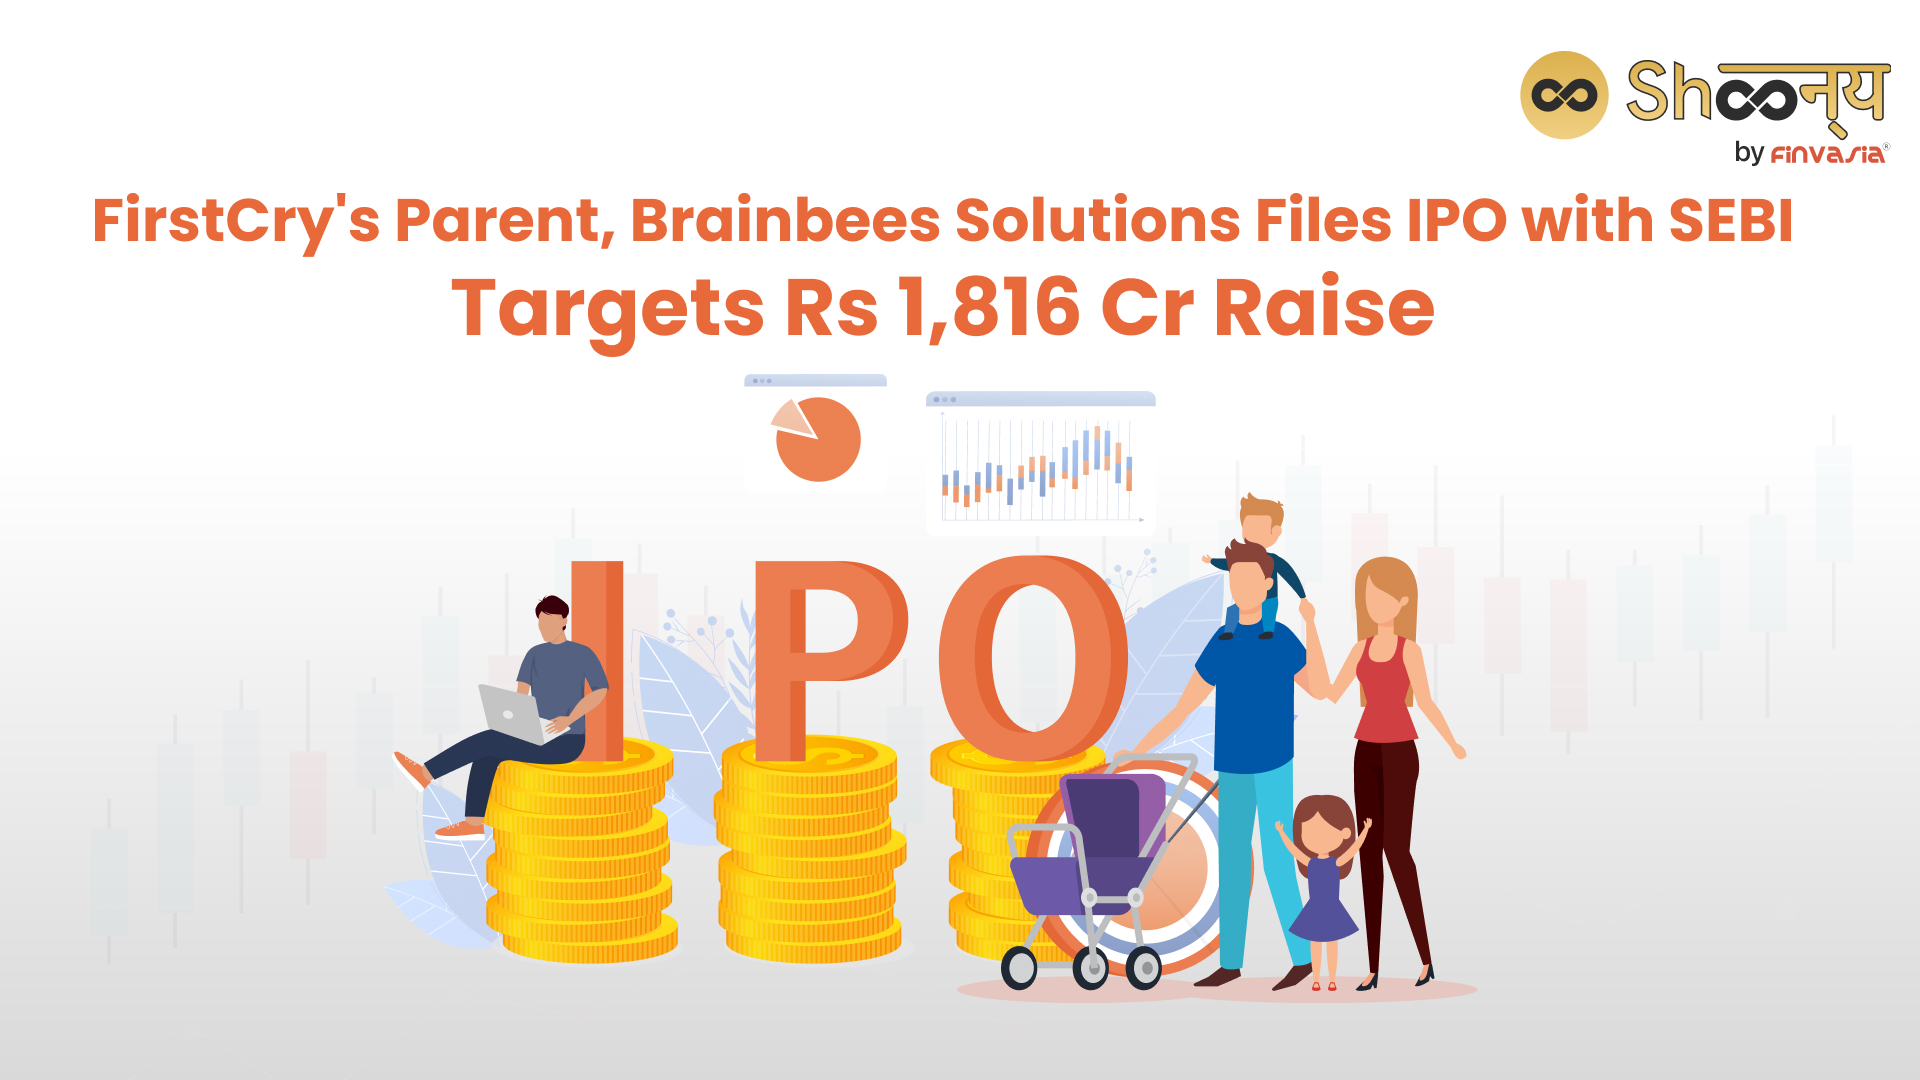 Brainbees Files IPO with SEBI, Aiming for Rs 1,816 Cr